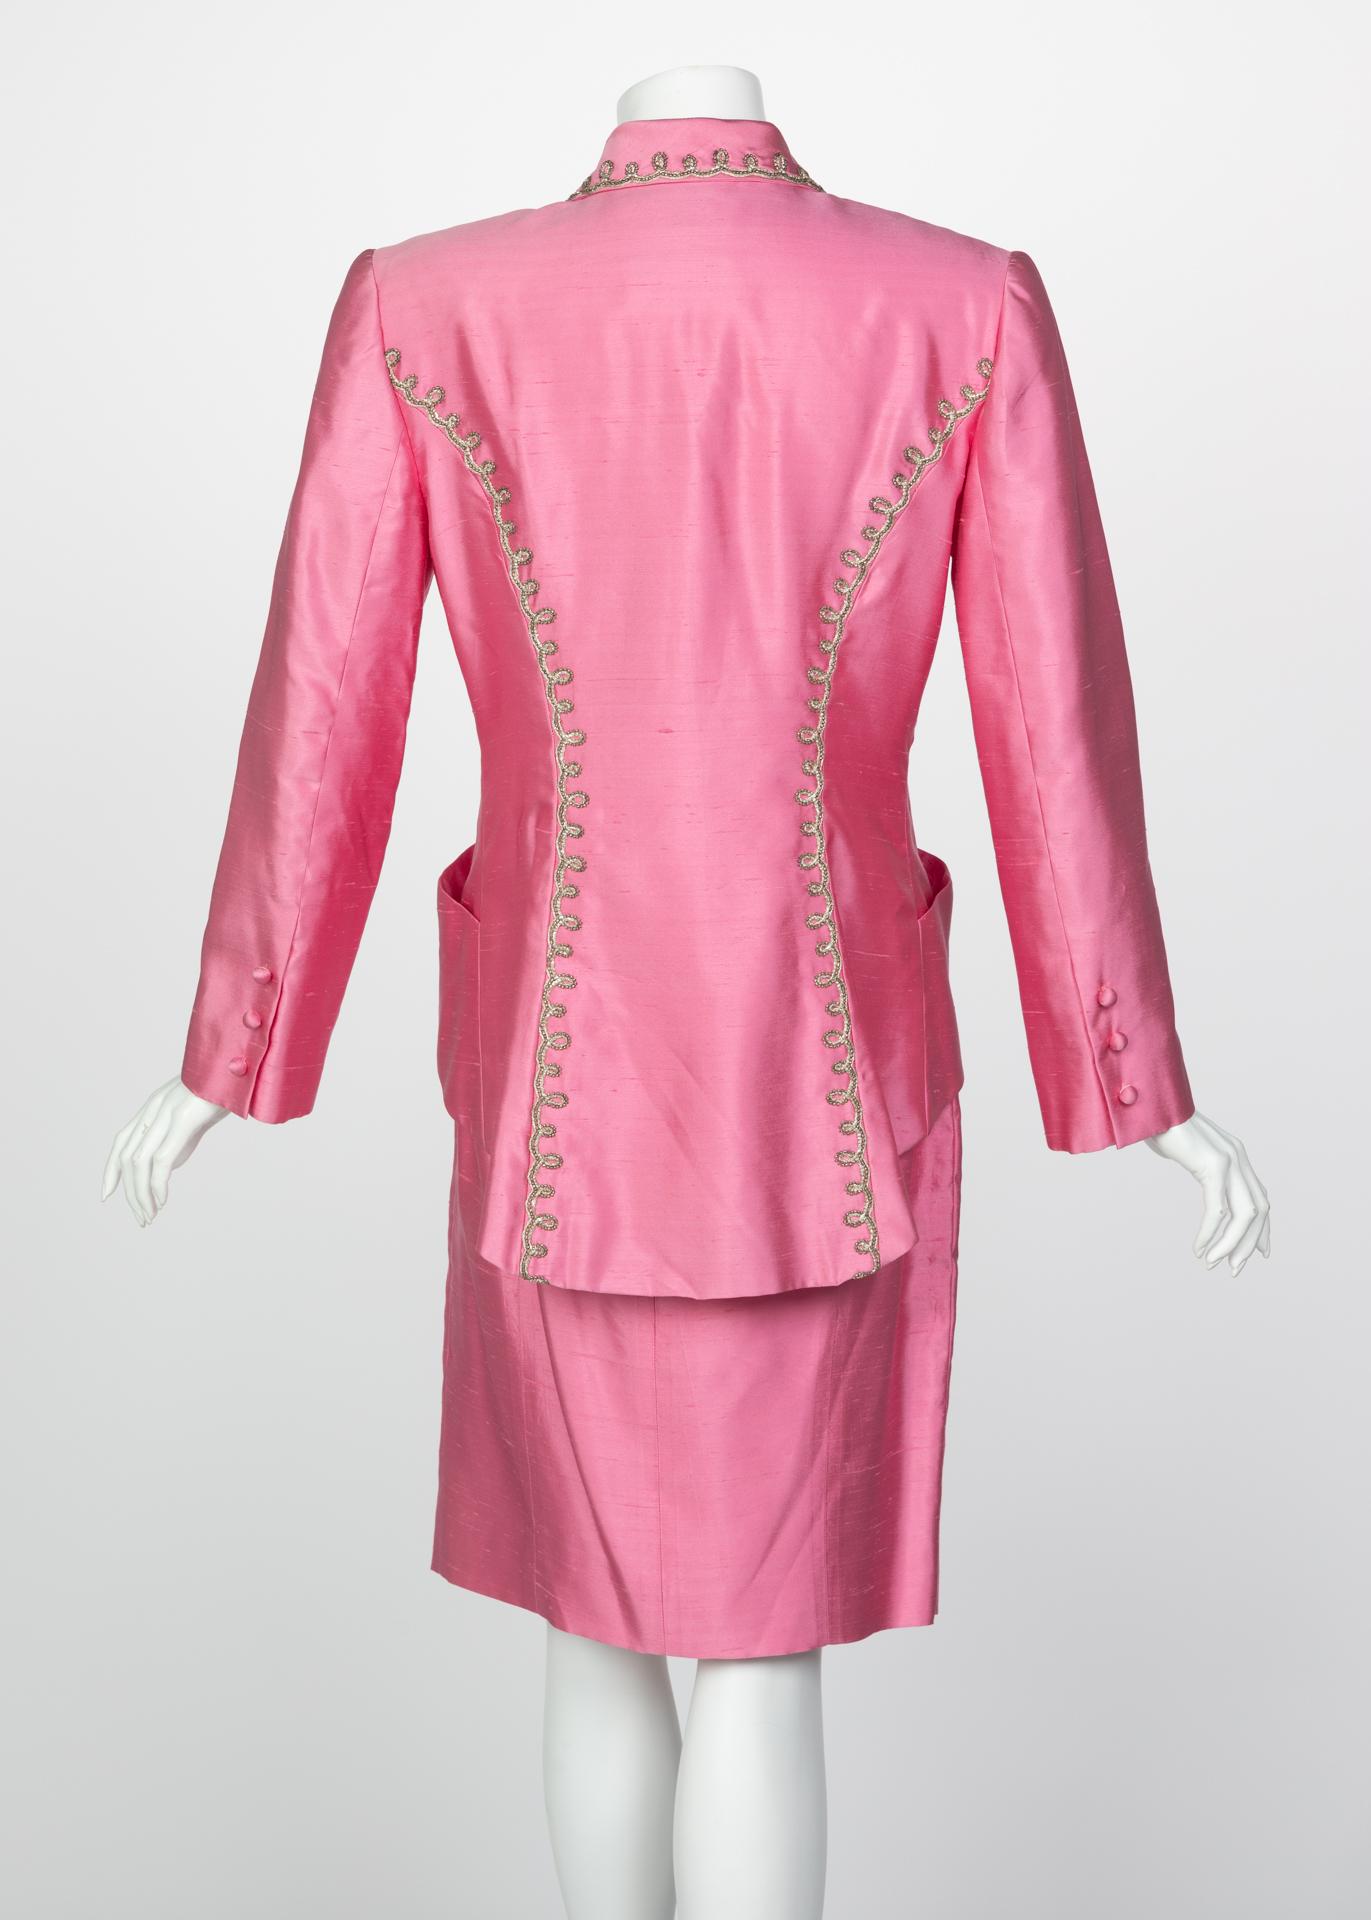 Women's Vintage Chloé Pink Silk Shantung Embroidered Beaded Skirt Suit For Sale